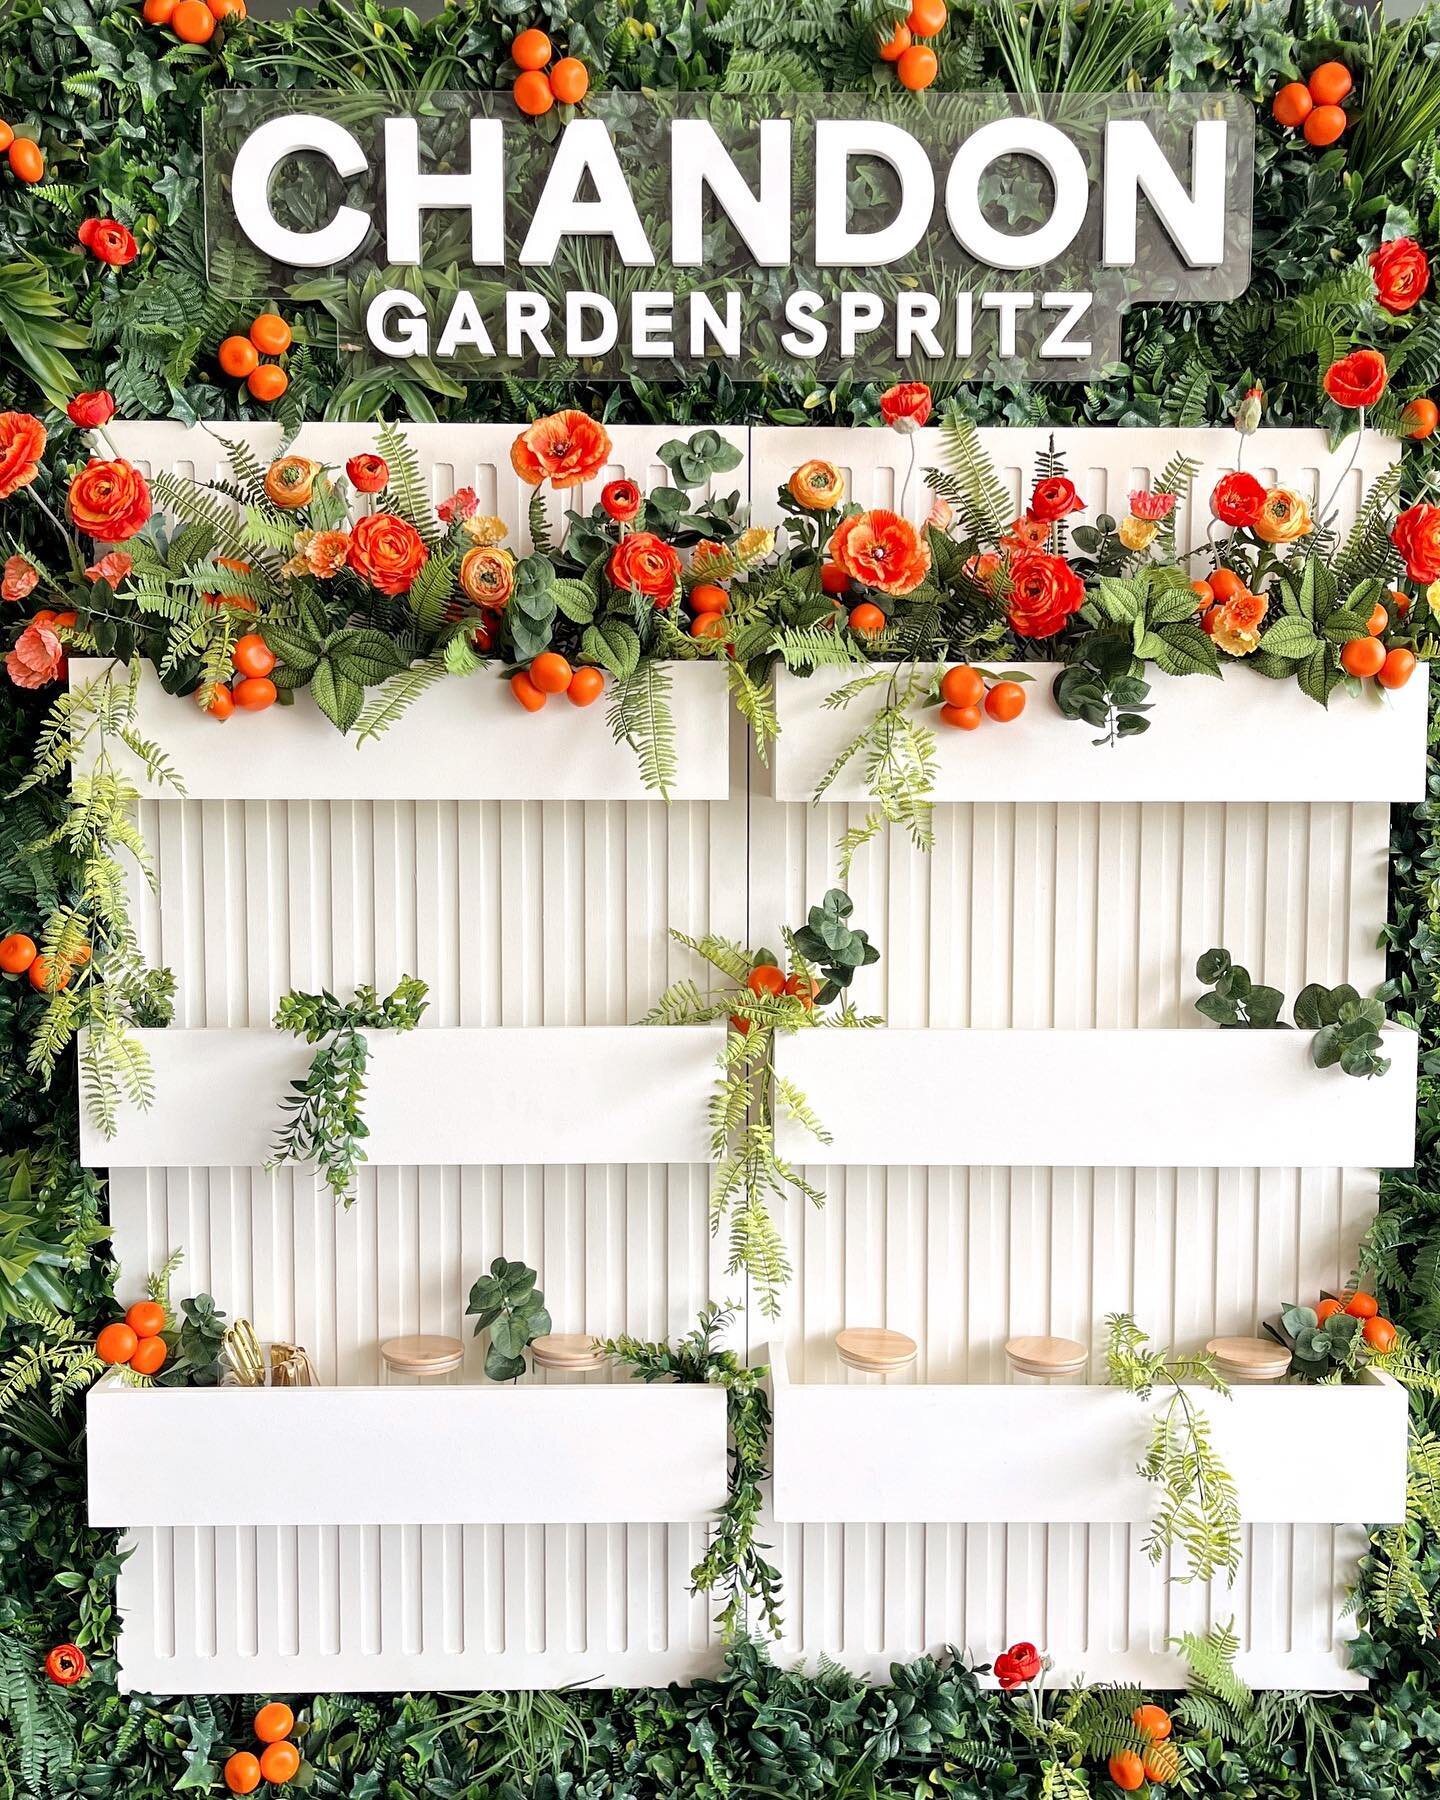 Had so much fun flowering this installation for @chandon at the @hyattlakewash dreamed up by @socialsocietyoc ! If you are looking for a stellar place to have a refreshing cocktail on the water, this is your spot!!